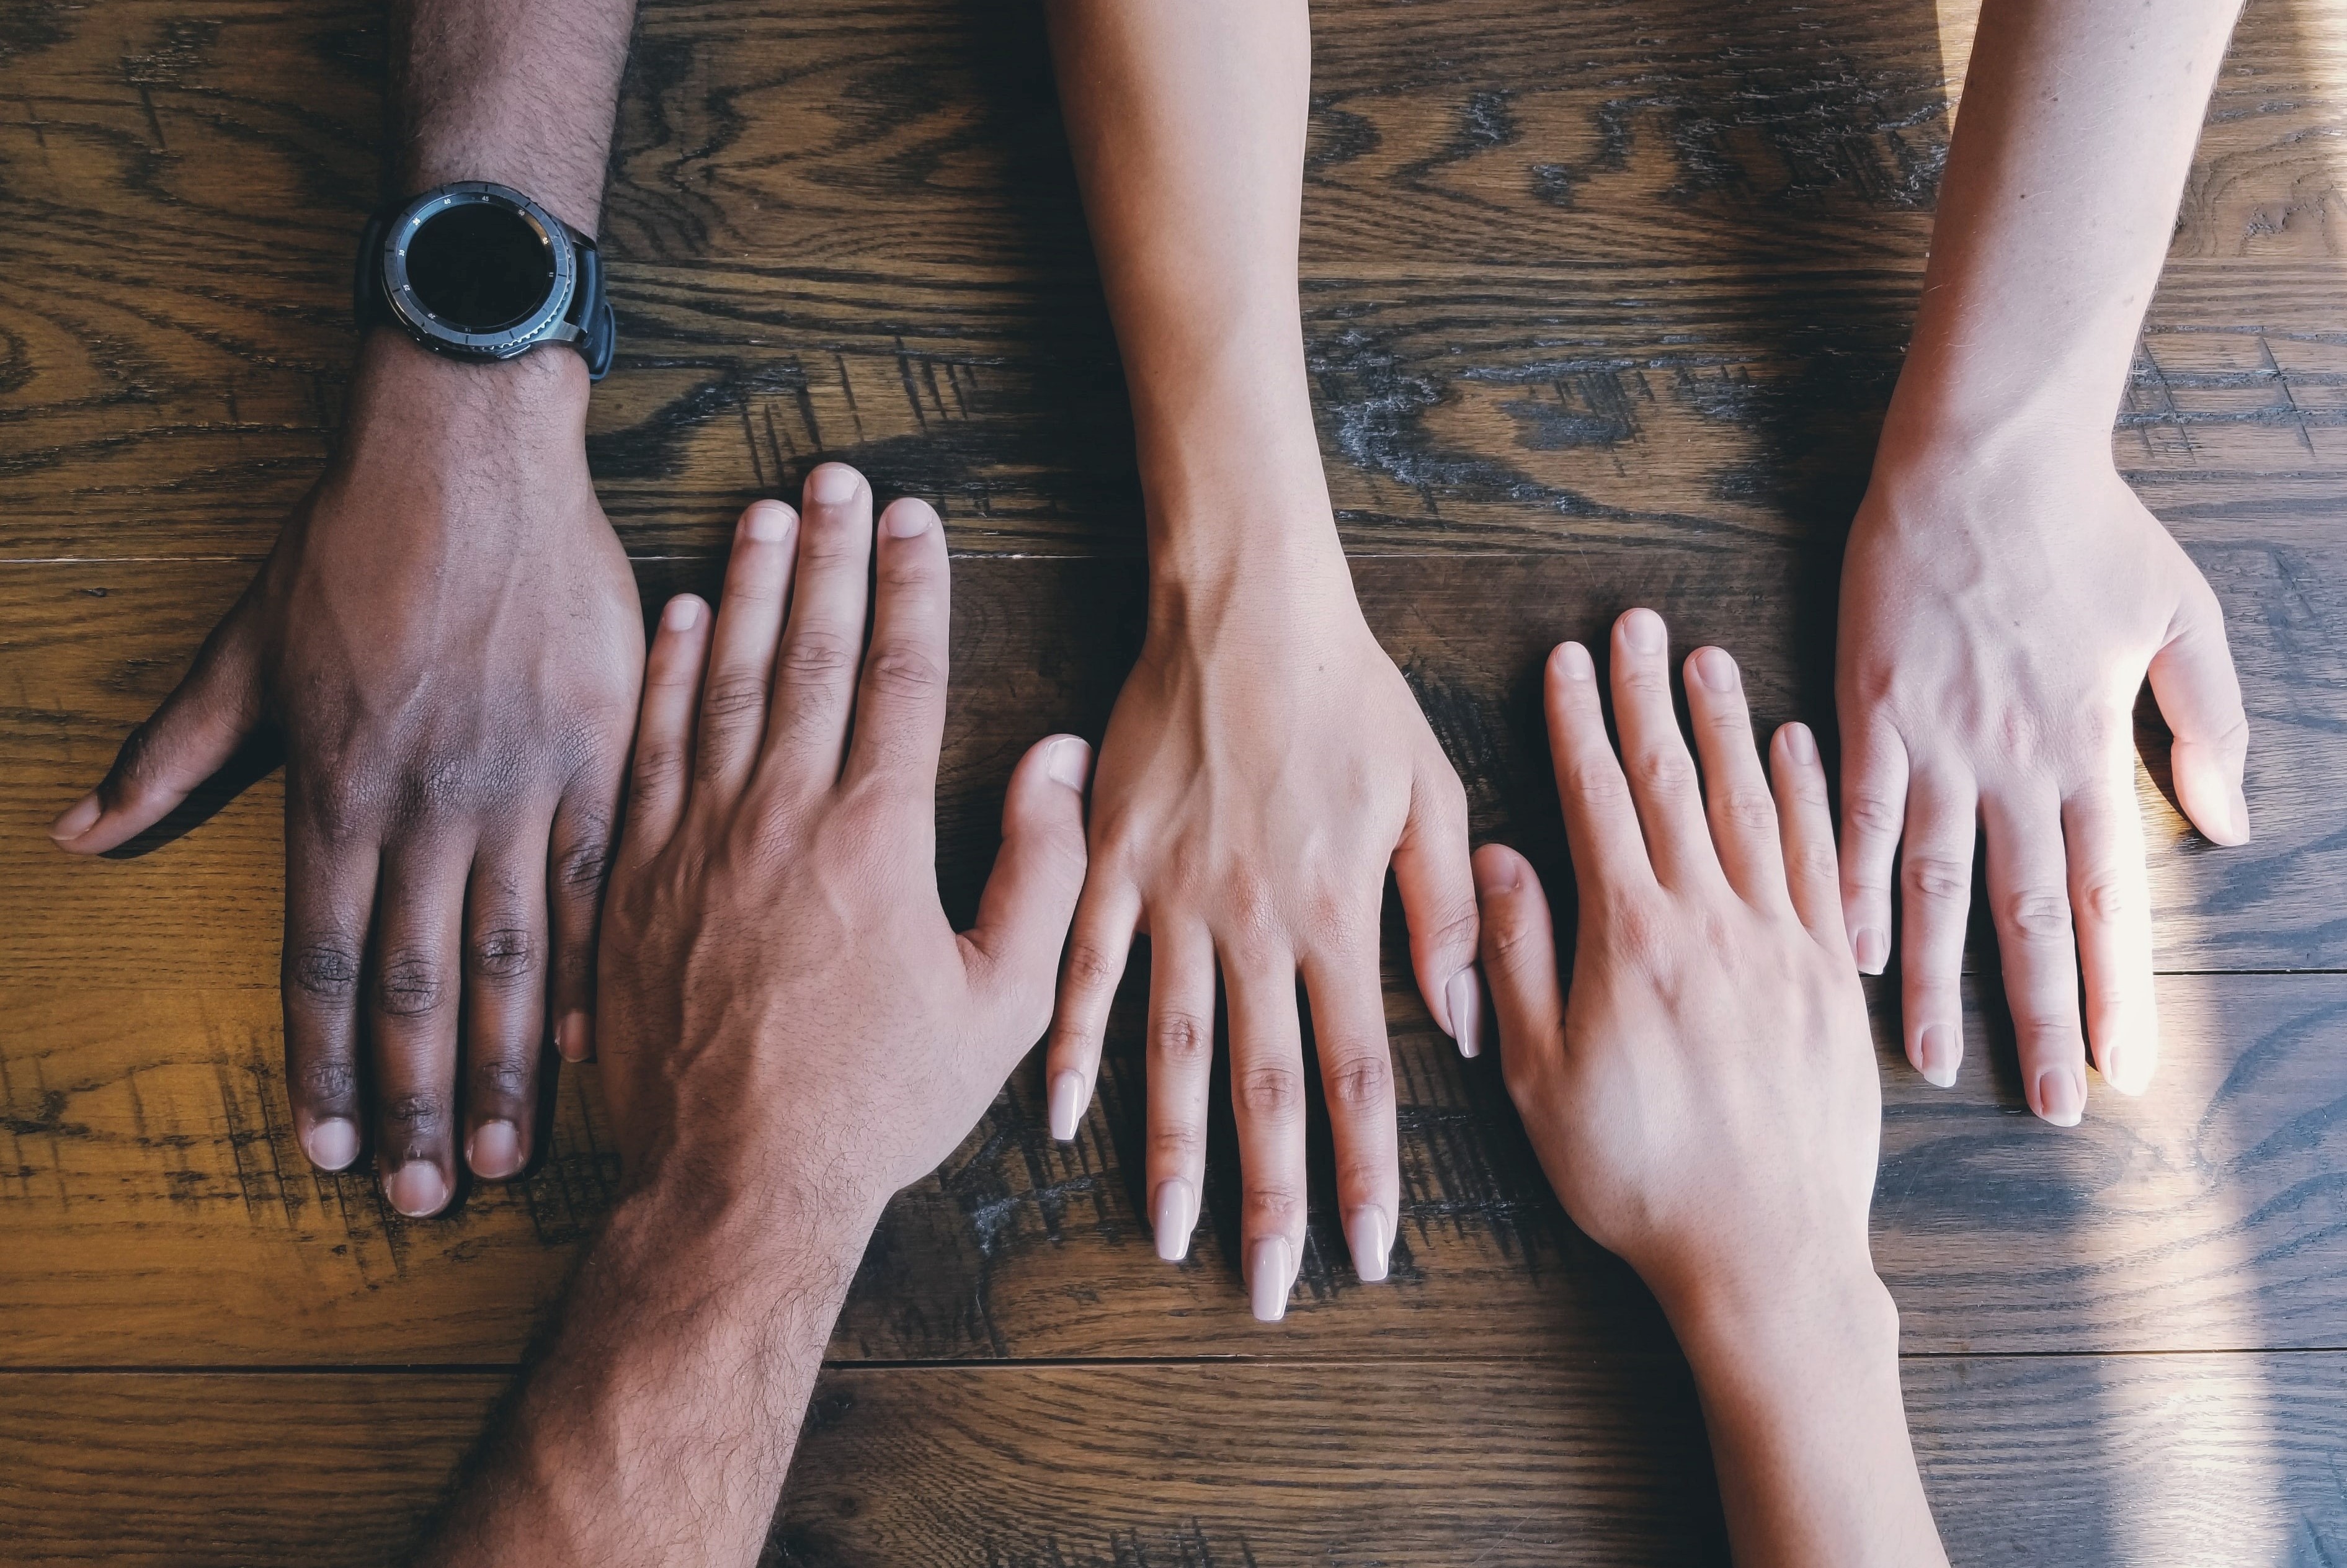 hands from a diverse group of people come together on a wooden table